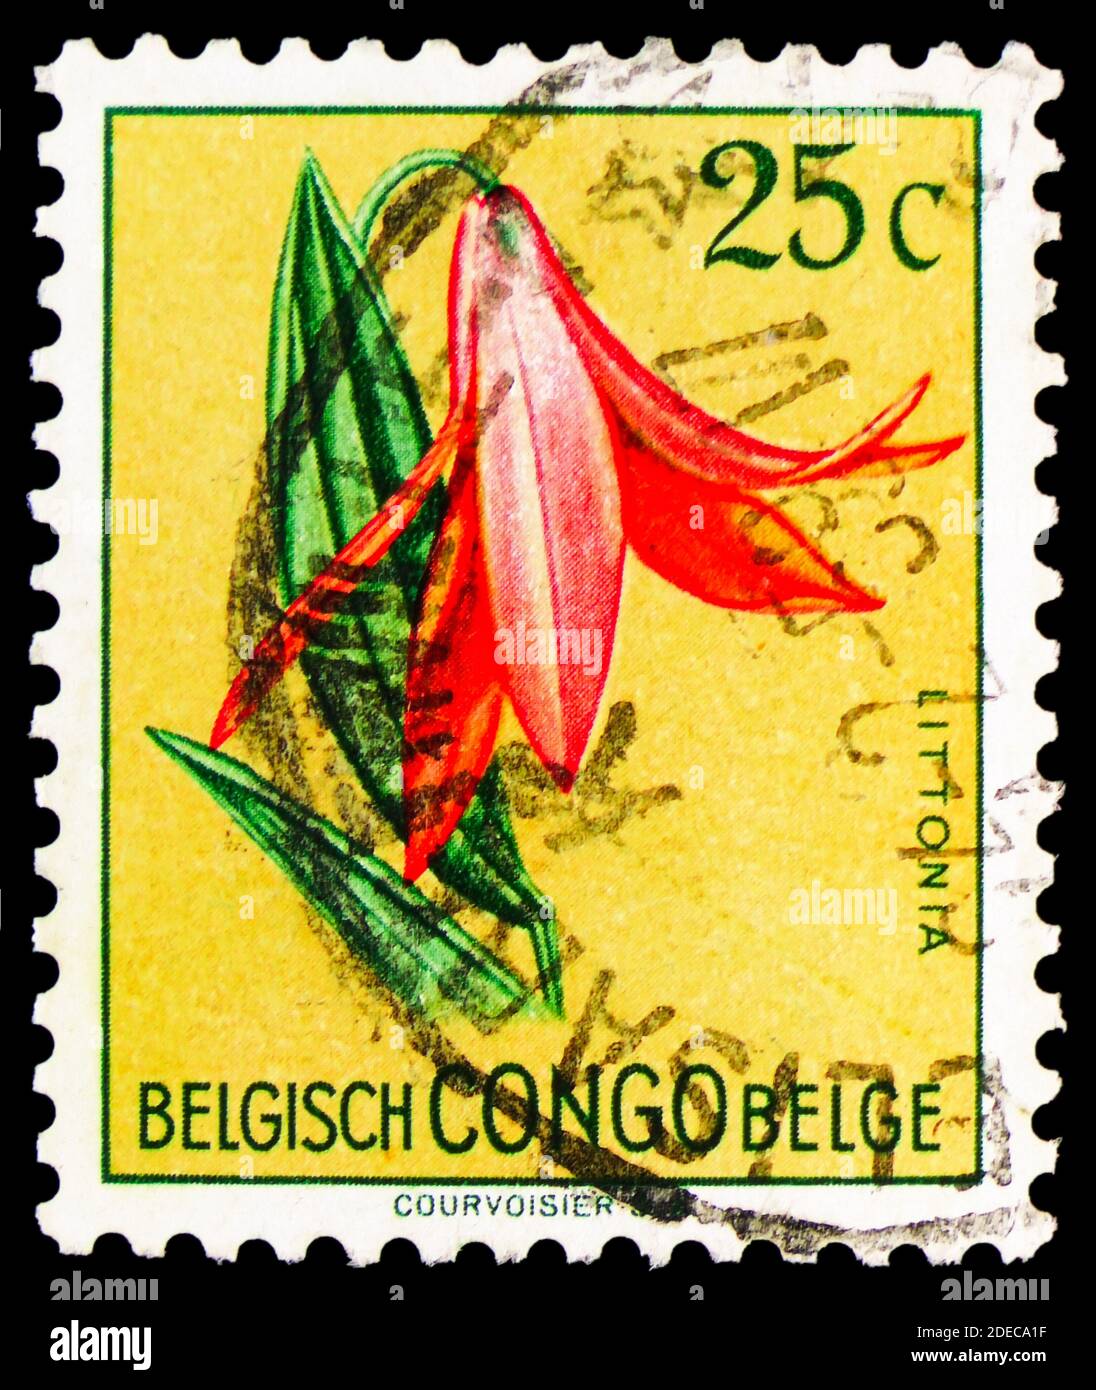 MOSCOW, RUSSIA - OCTOBER 17, 2020: Postage stamp printed in Belgish Congo shows Littonia lindenii, Flowers serie, circa 1952 Stock Photo